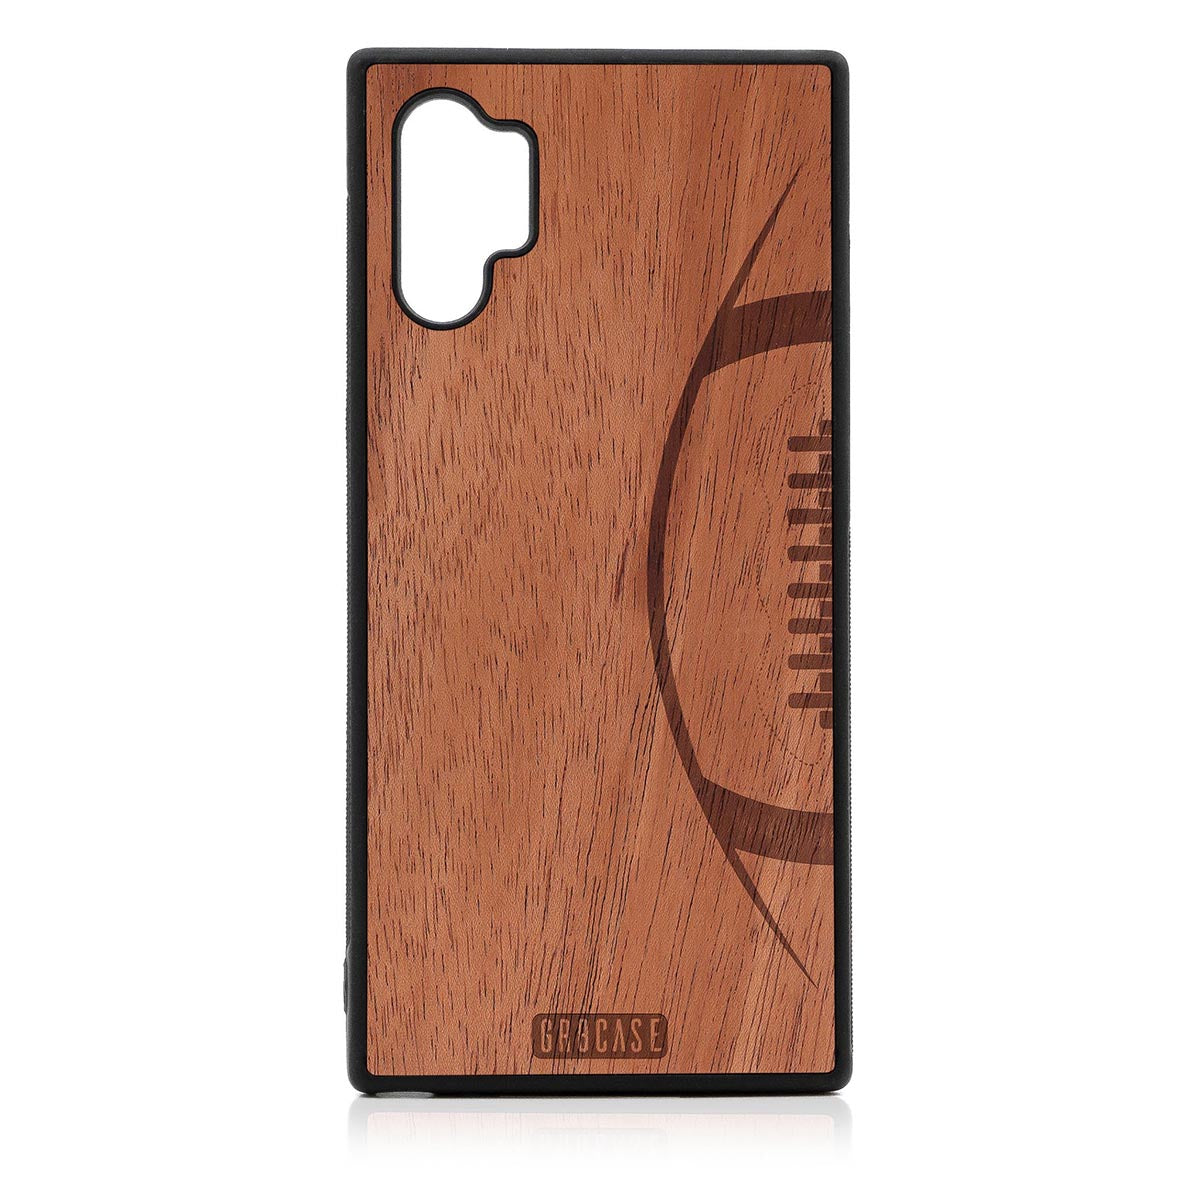 Football Design Wood Case For Samsung Galaxy Note 10 Plus by GR8CASE